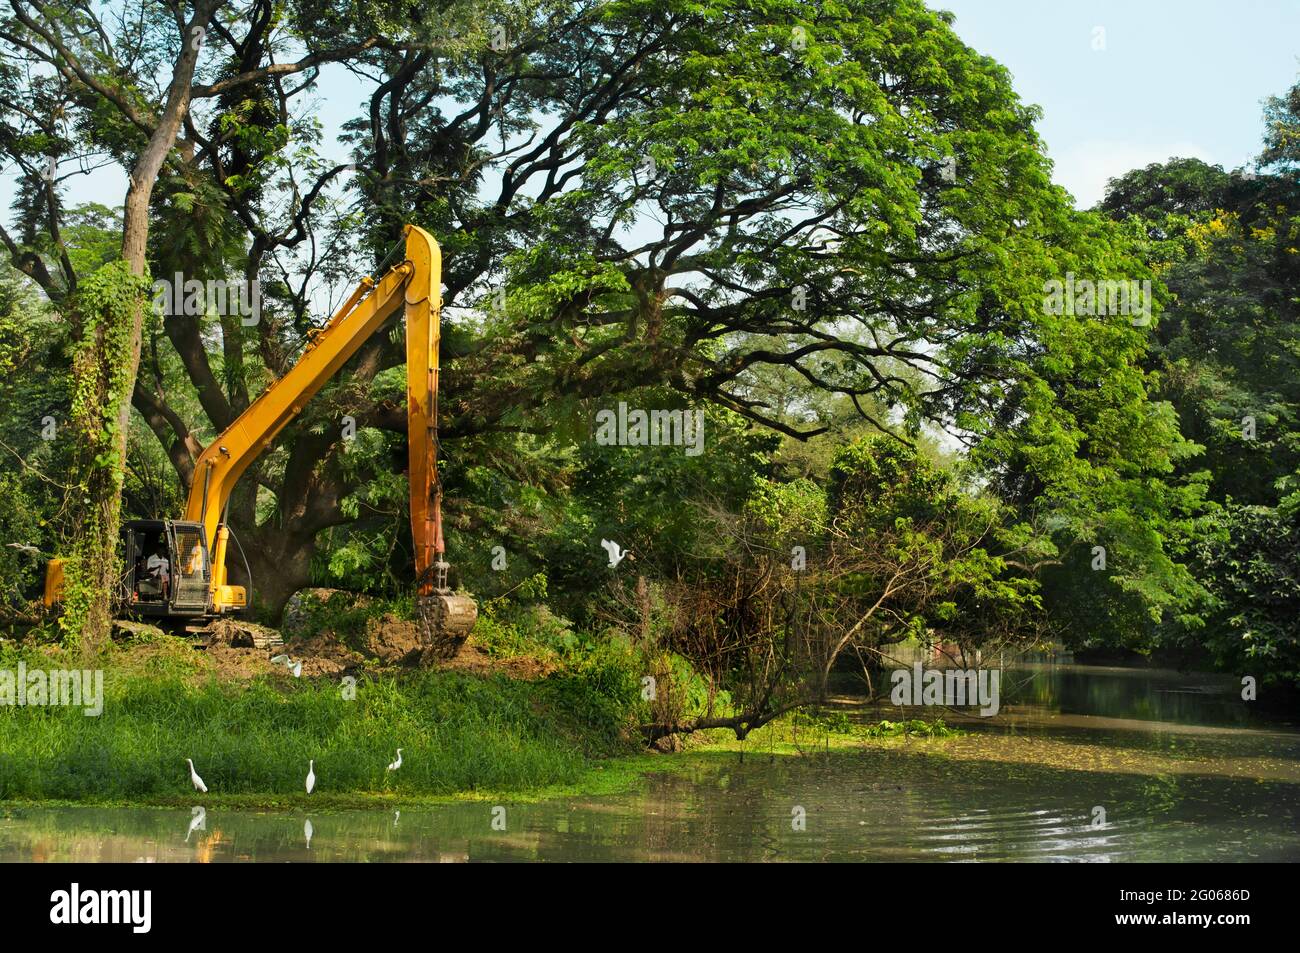 Destruction of forest, deforestation and damaging environment Stock Photo